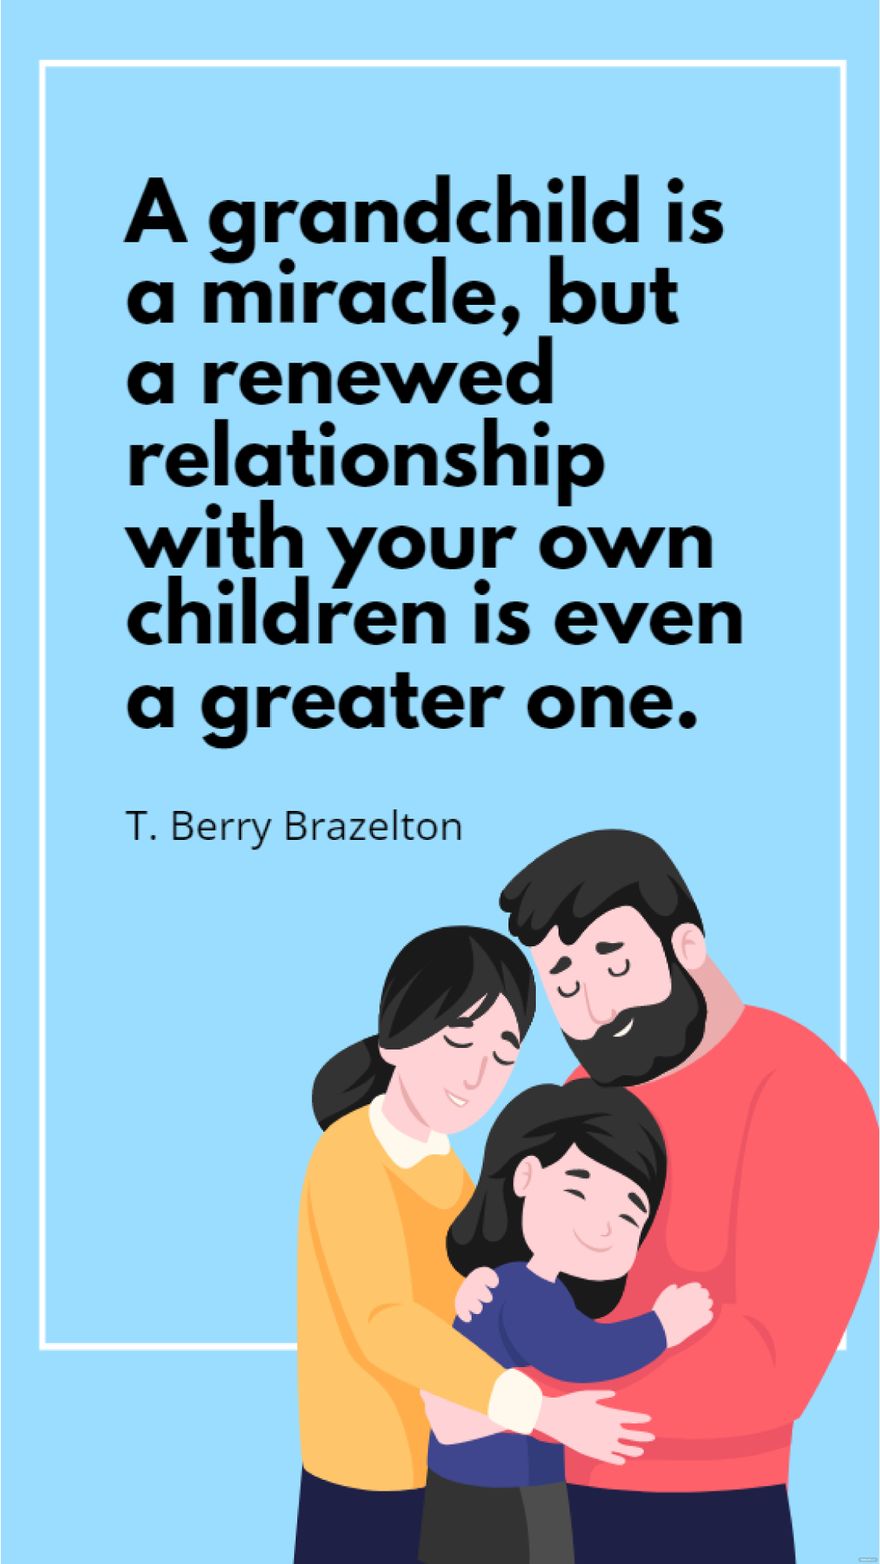 T. Berry Brazelton - A grandchild is a miracle, but a renewed relationship with your own children is even a greater one.